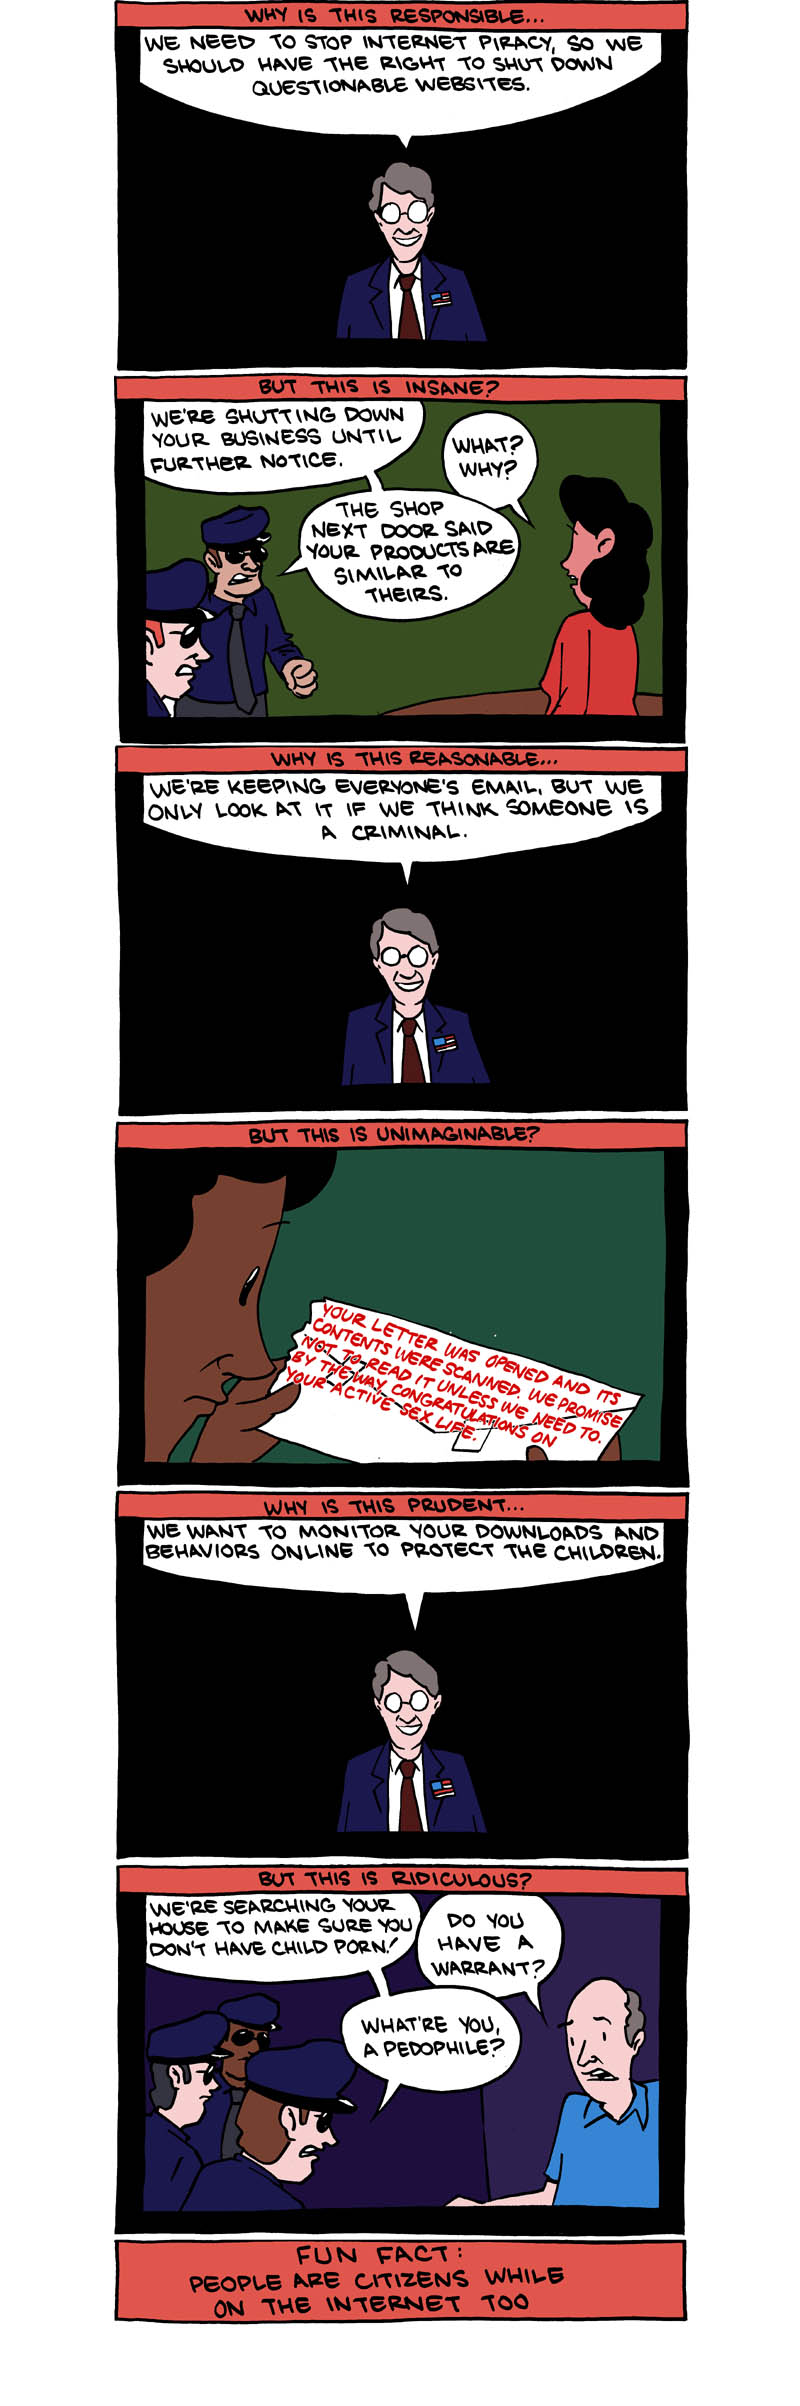 people are citizens on the internet too comic strip smbc Citizens on the Internet [Comic Strip]